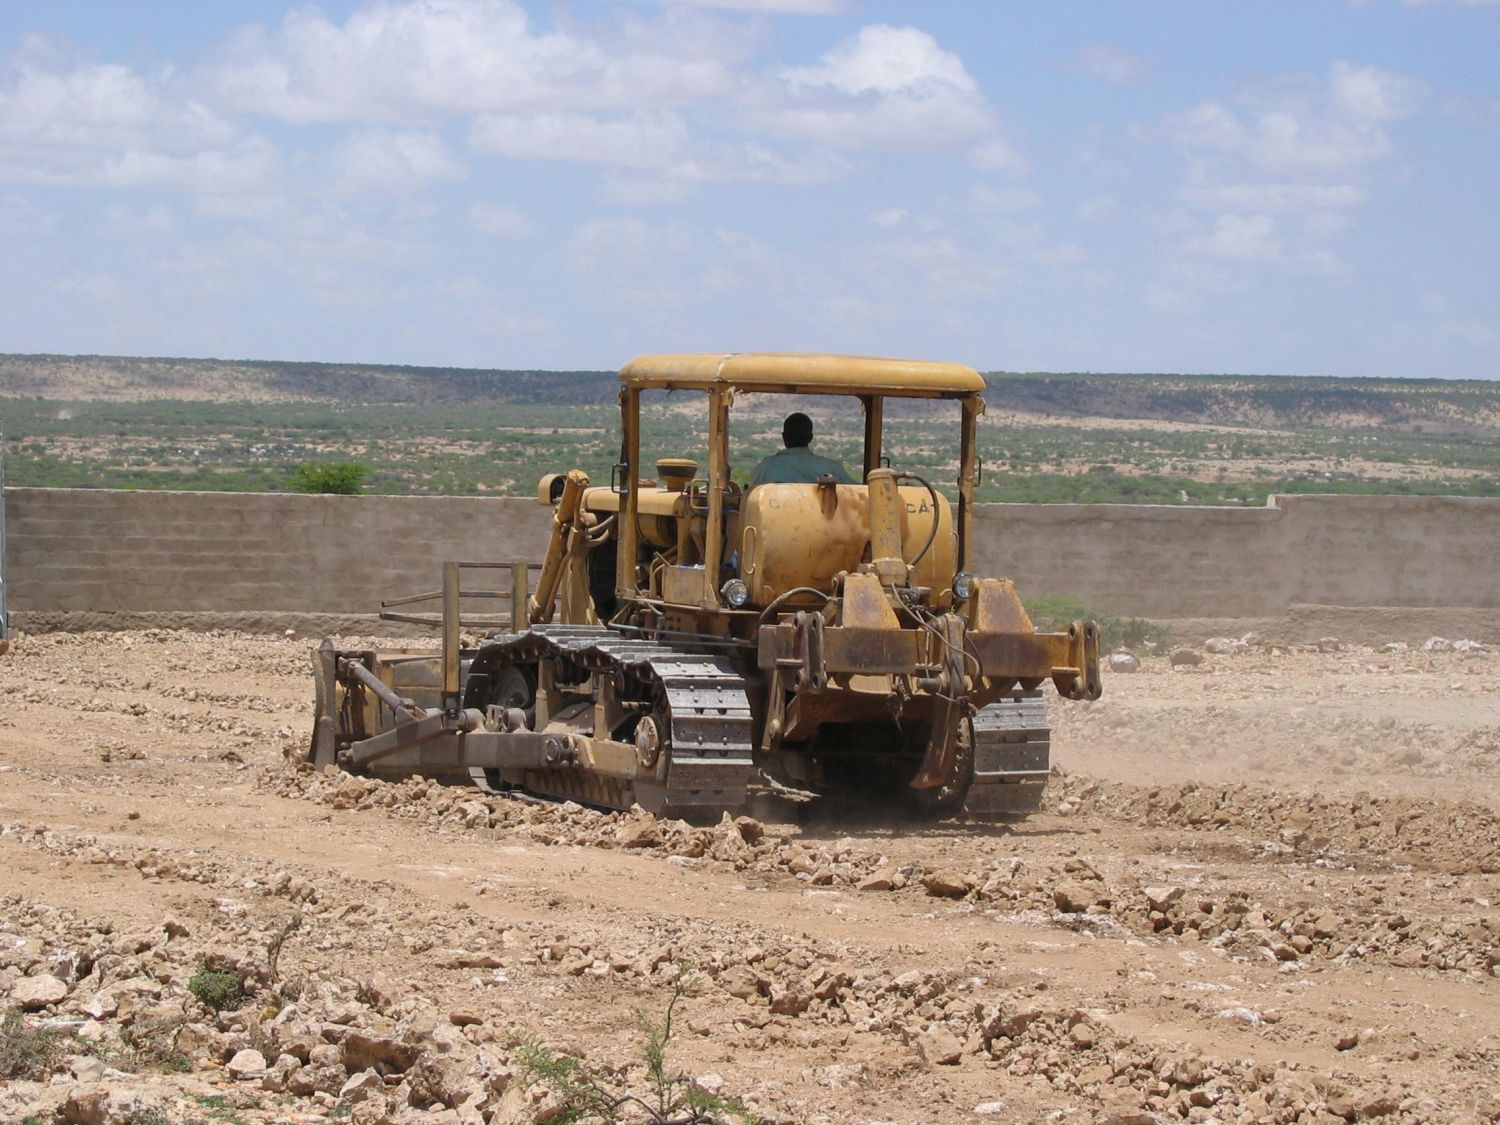 View of a bulldozer preparing to terrain. Perimeter wall in the background.